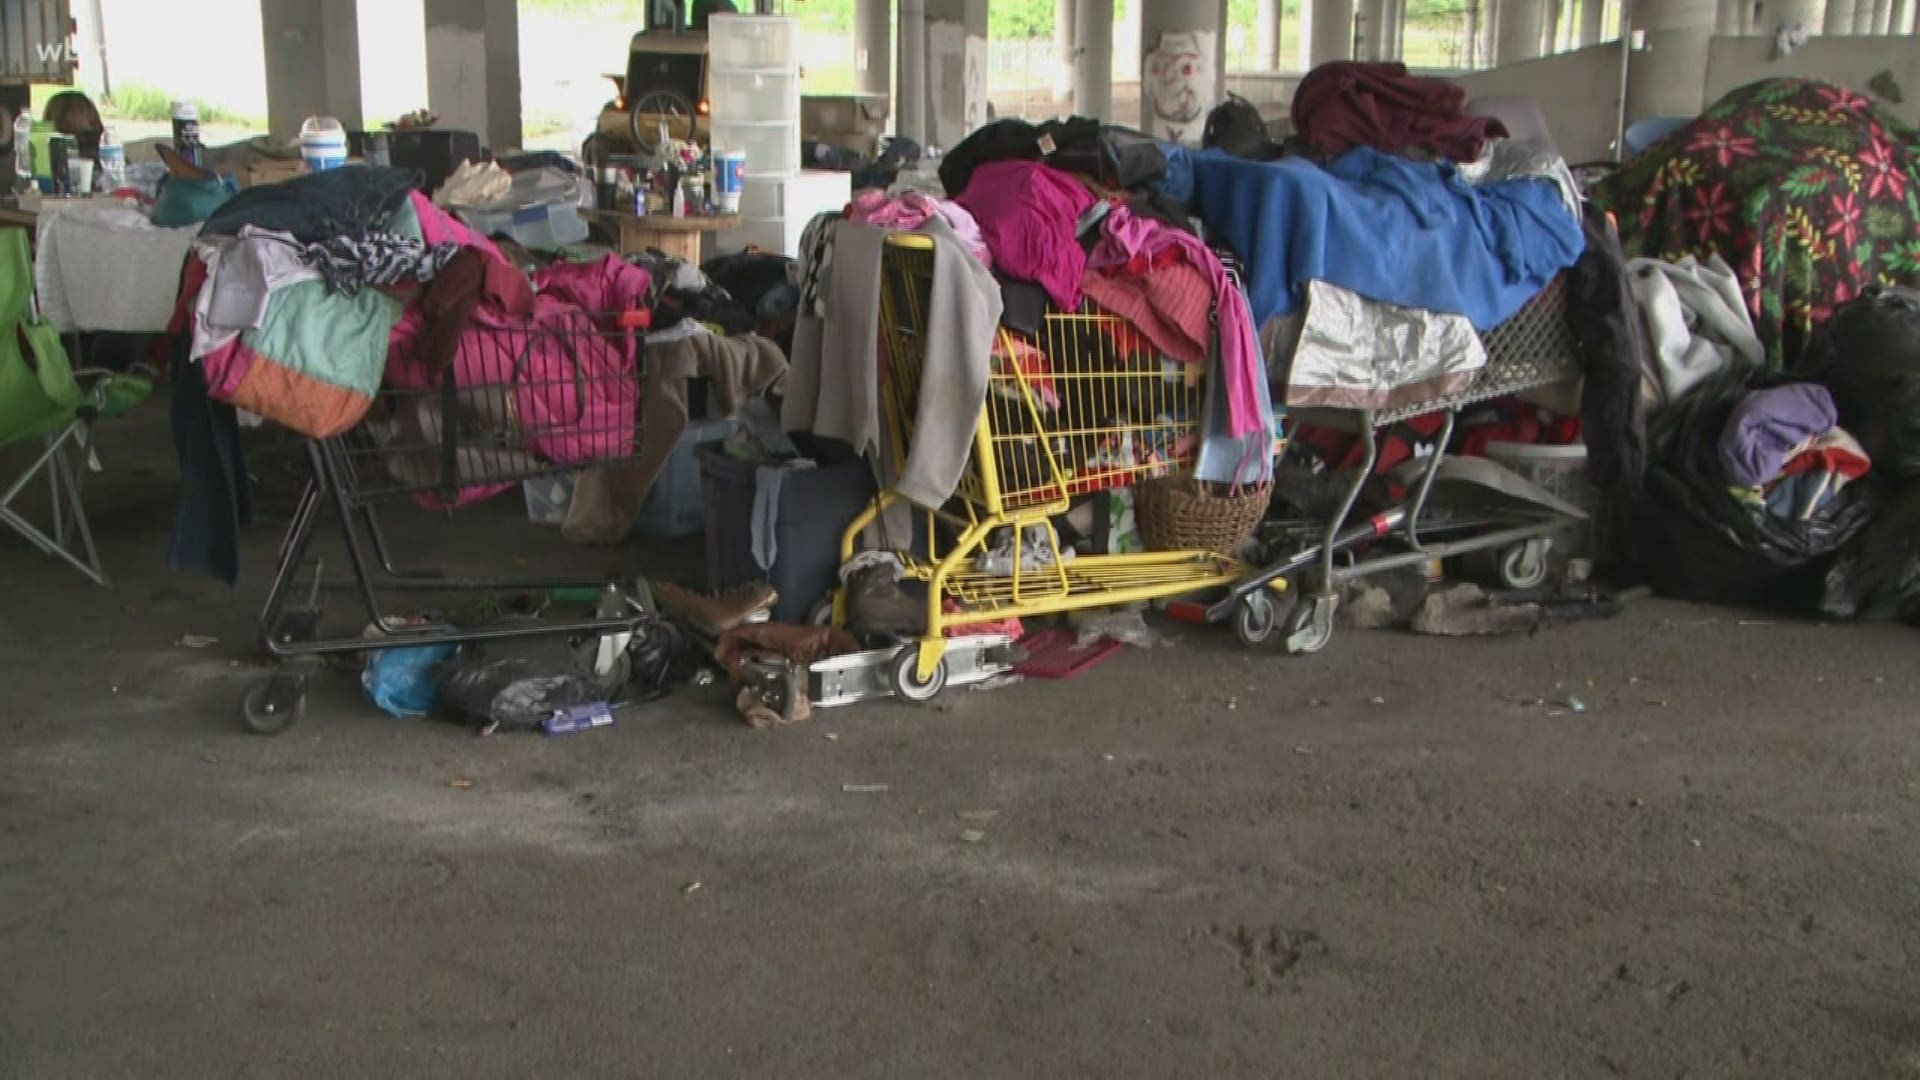 Volunteers across East Tenn. are counting the number of homeless in 12 counties to get a snapshot of the problem & what's working and what isn't.